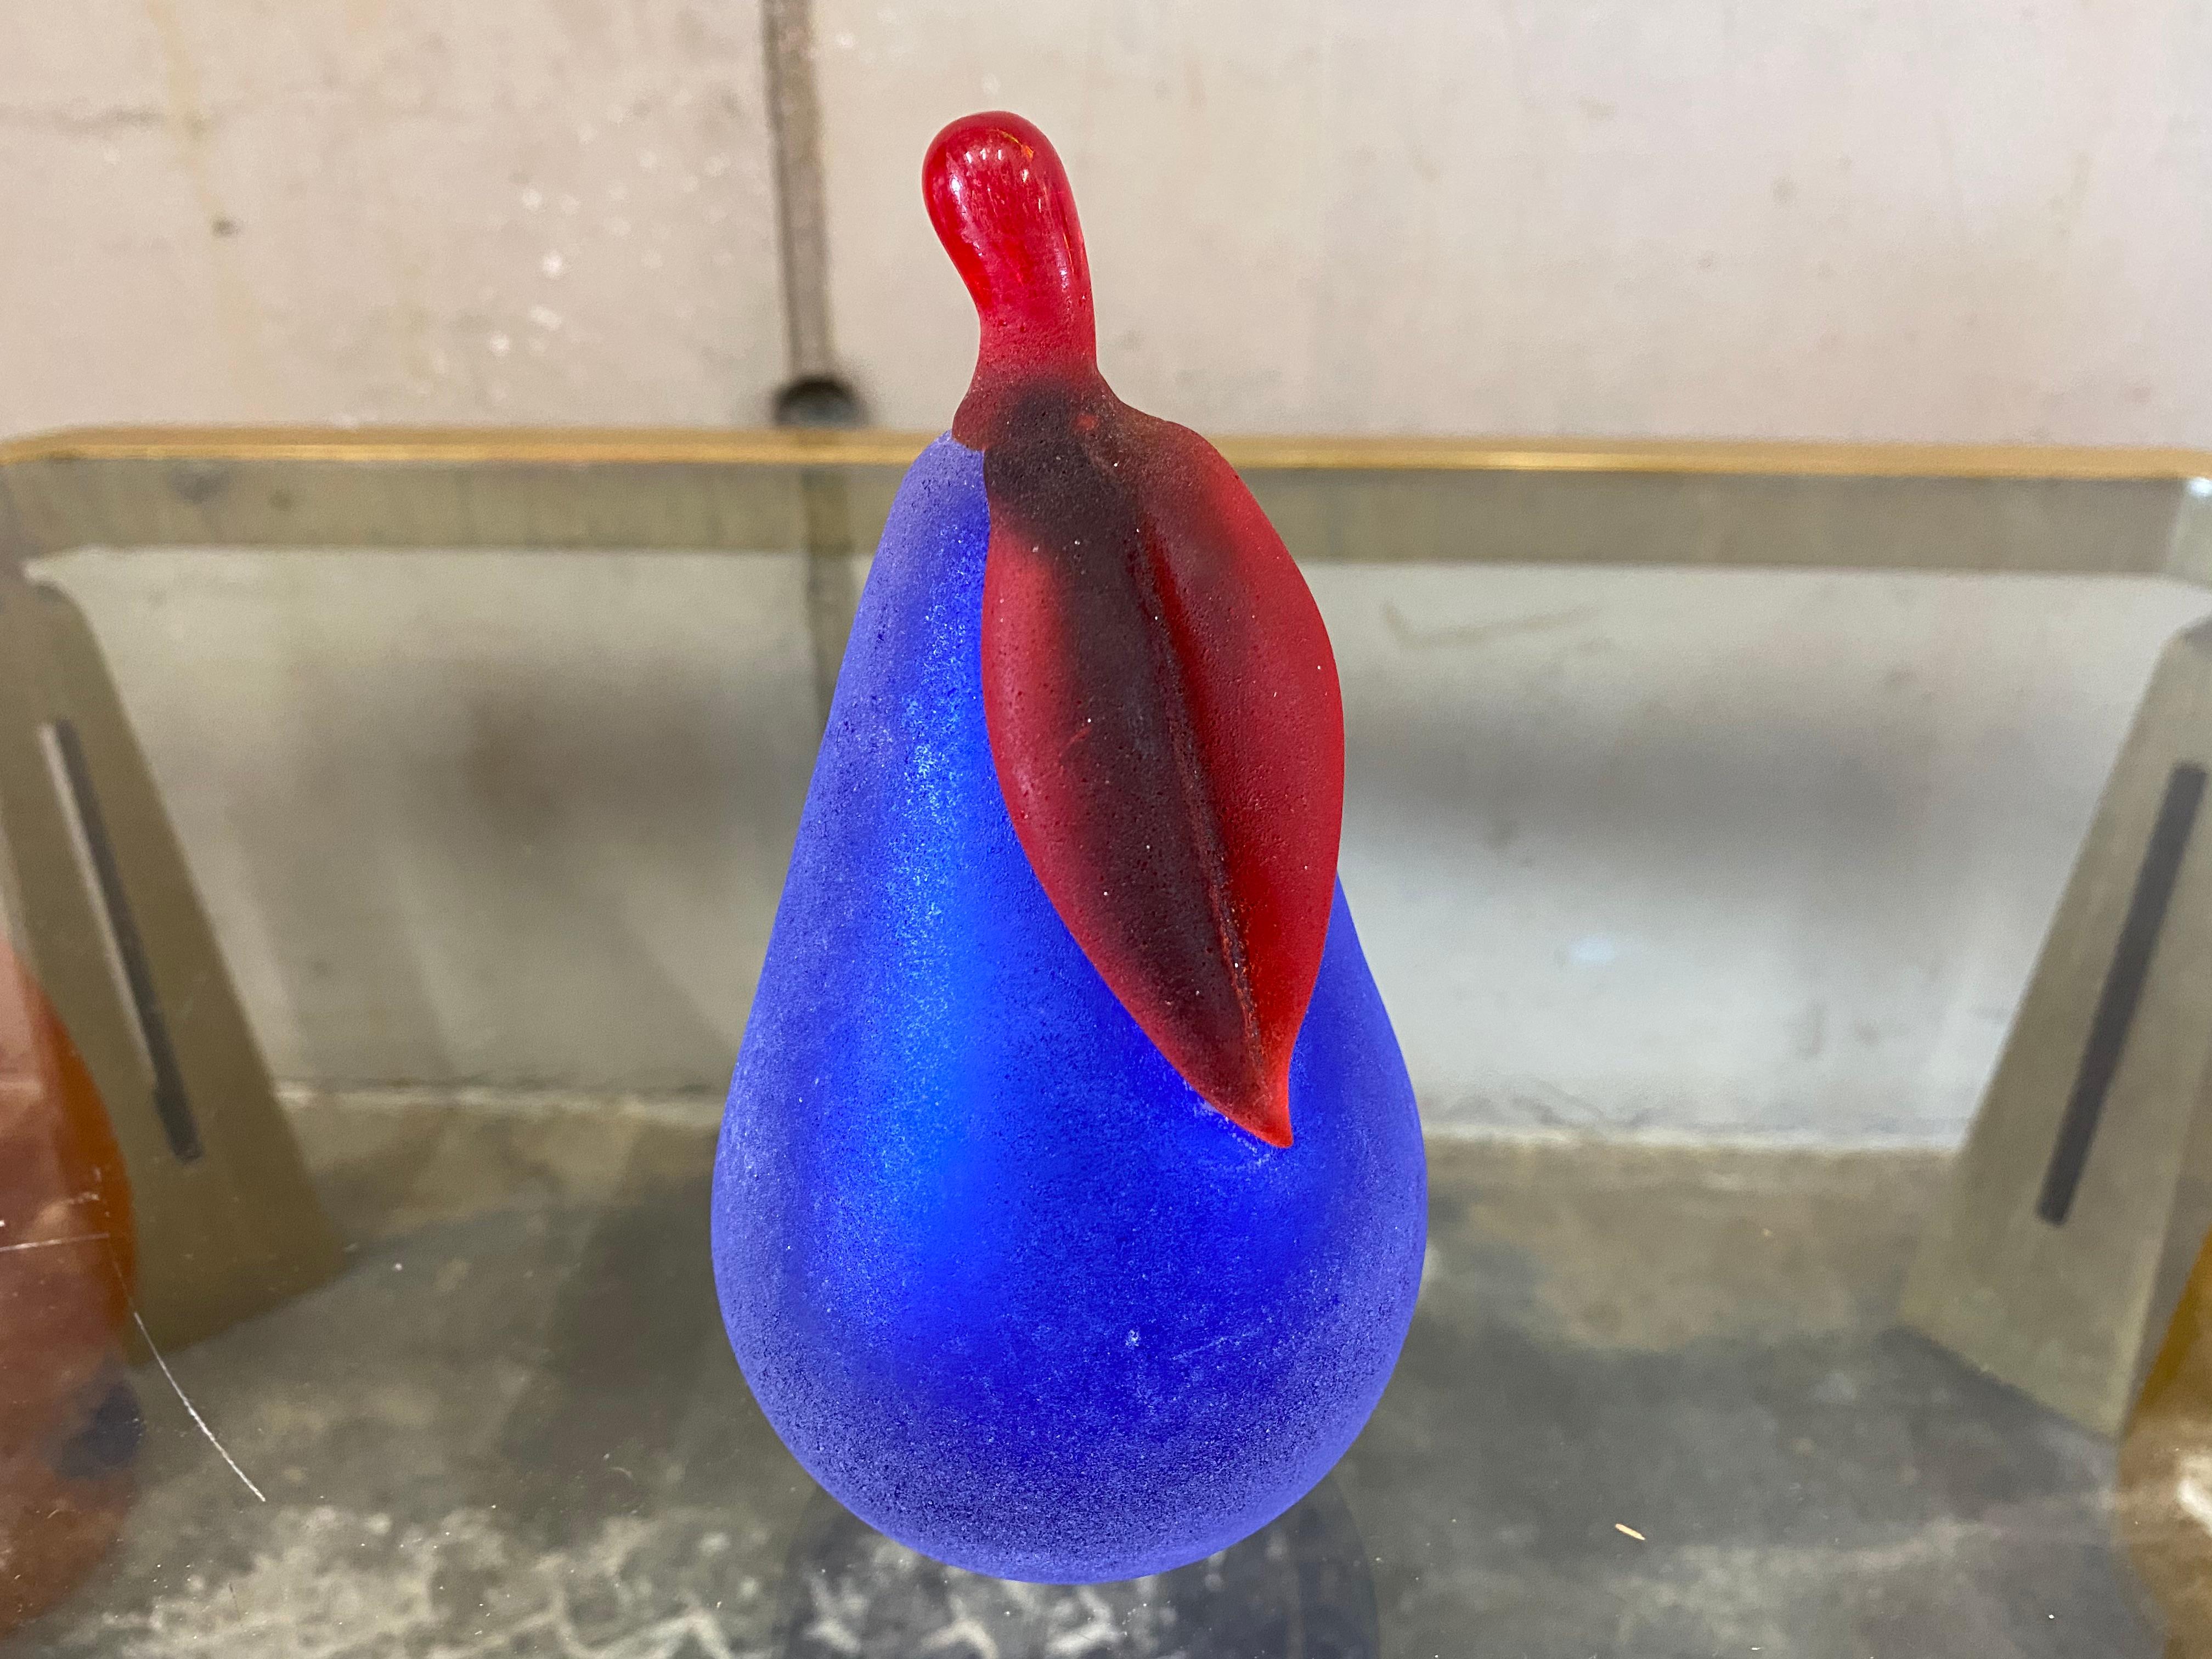 Post-Modern Murano Glass Fruit Pear by Franco Moretti, Italy, 1980s